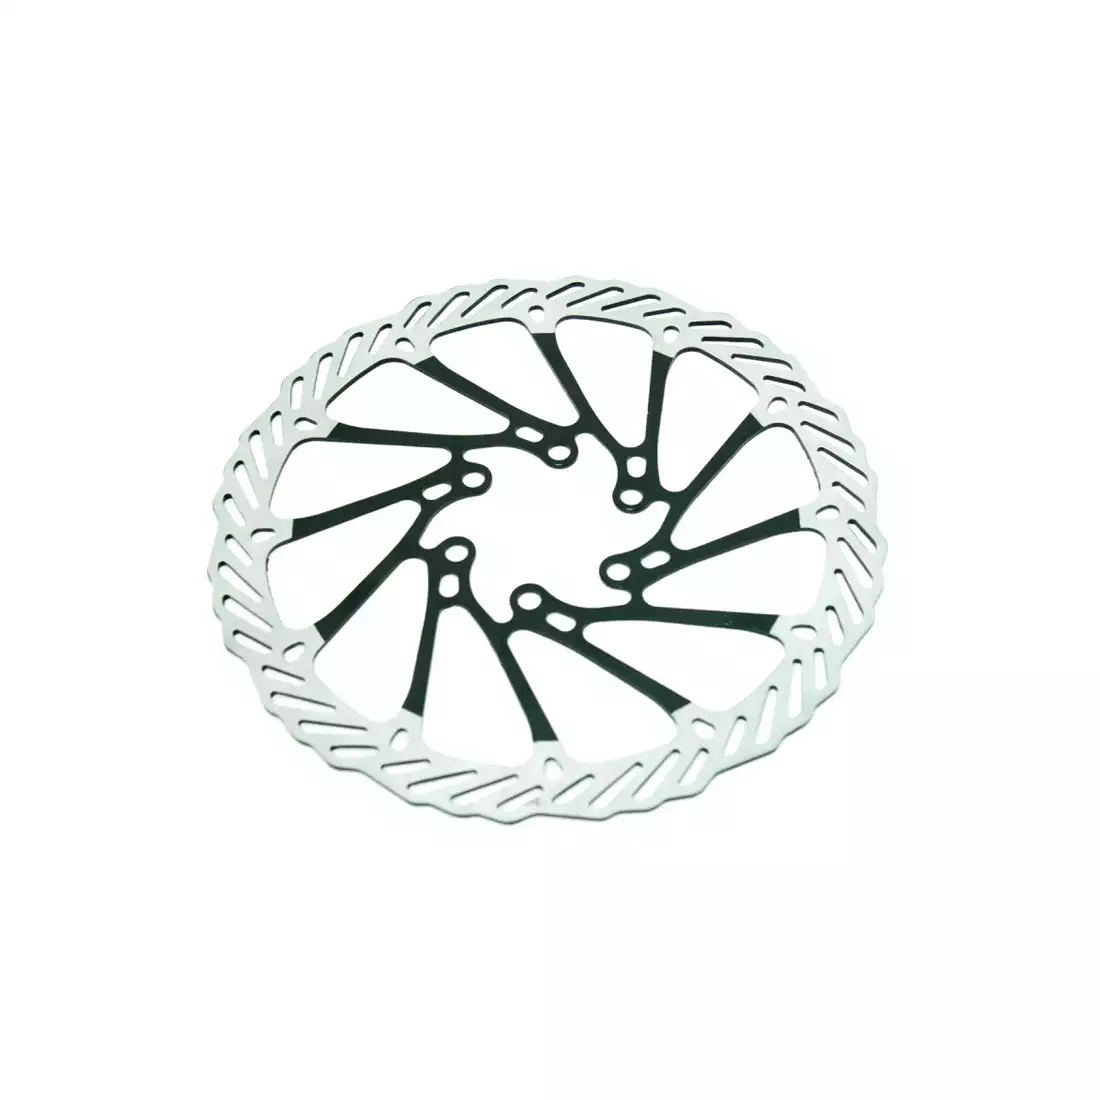 CLARKS CL brake disc 160mm for 6 bolts IS silver-black